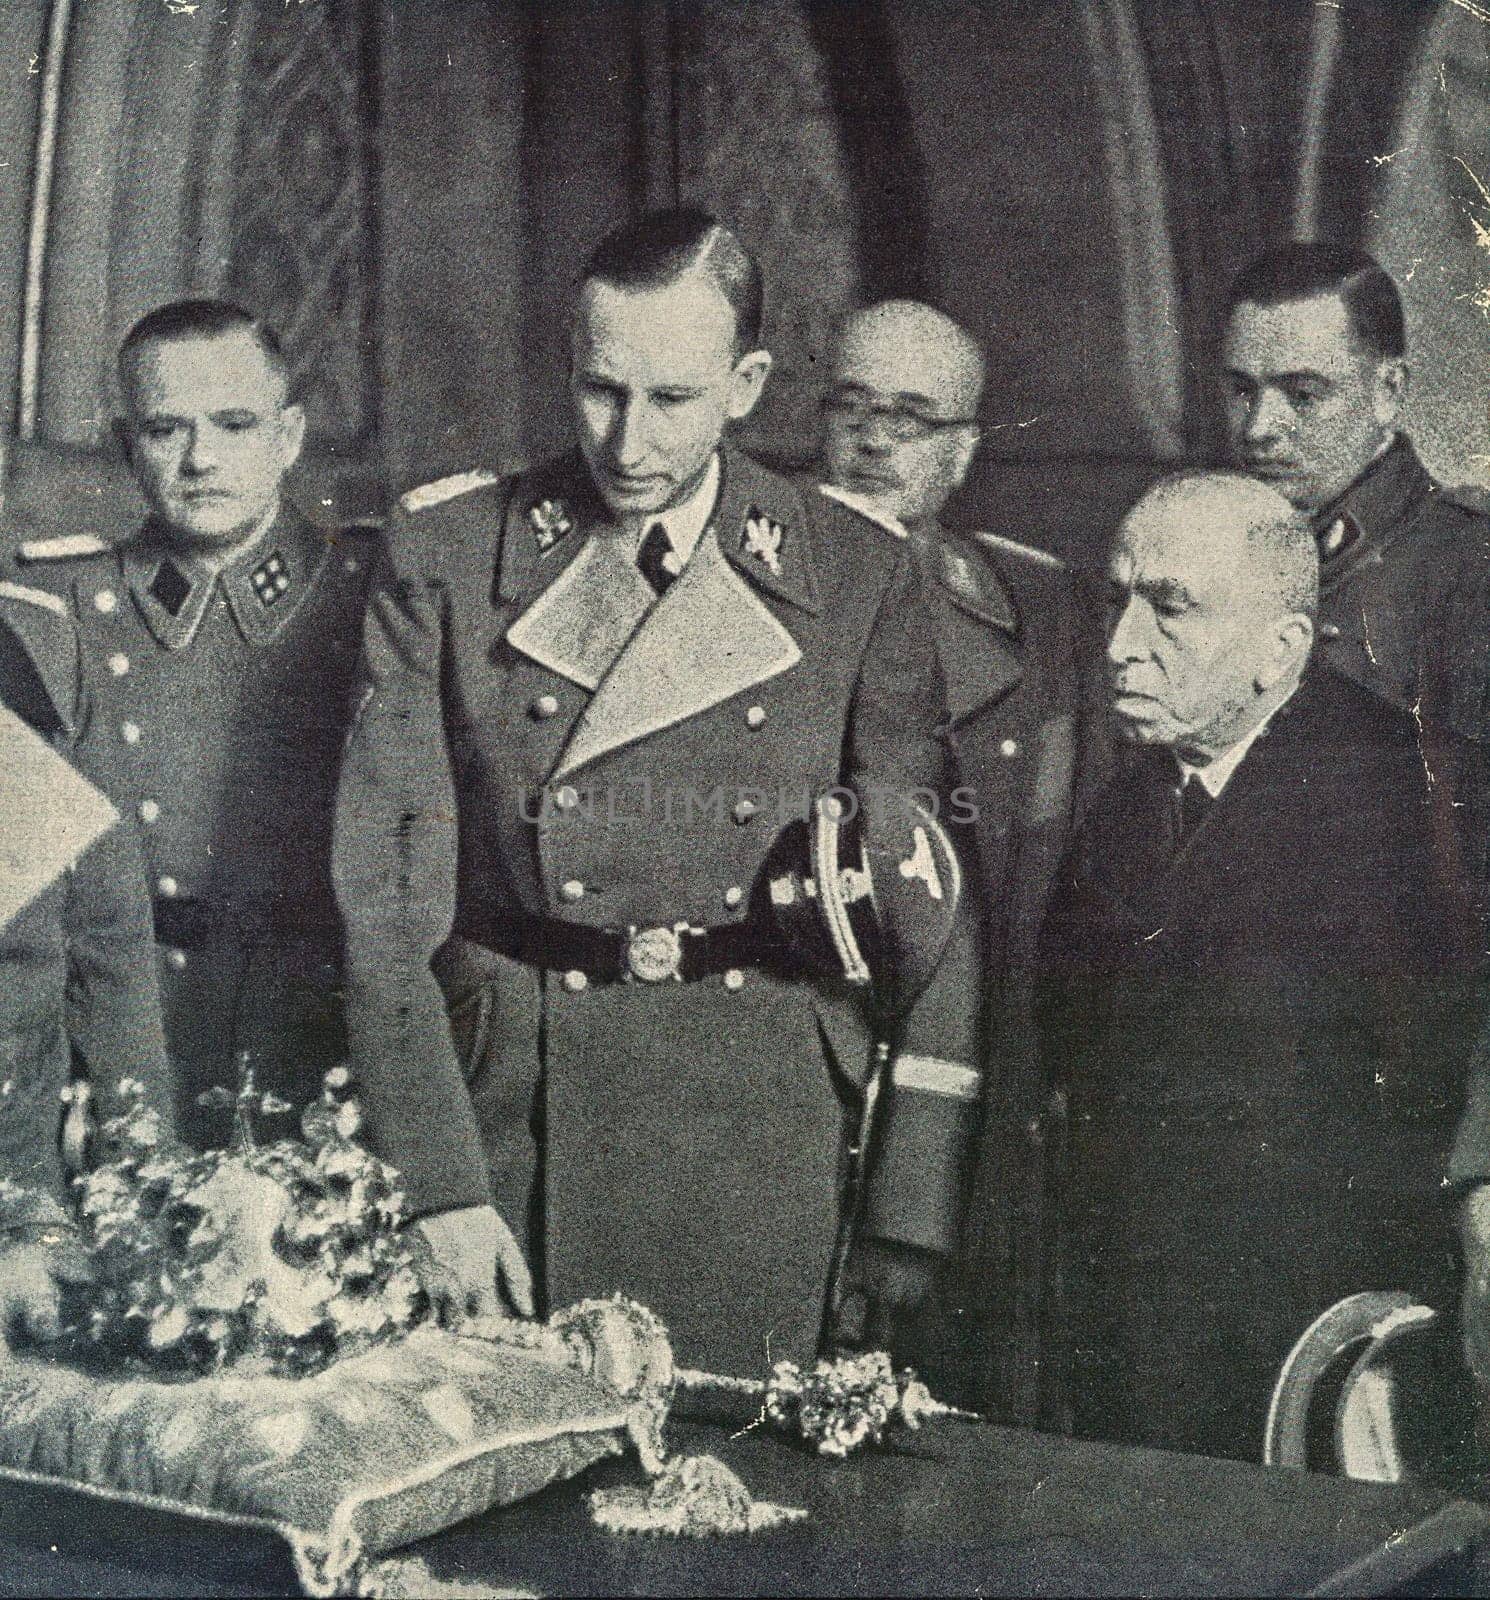 Reinhard Heydrich, Deputy Reich Protector of the Protectorate of Bohemia and Moravia, left, and Emil Hacha, State President, at the Prague Castle in Prague, Protectorate of Bohemia and Moravia. Heydrich admires crown jewels. by roman_nerud